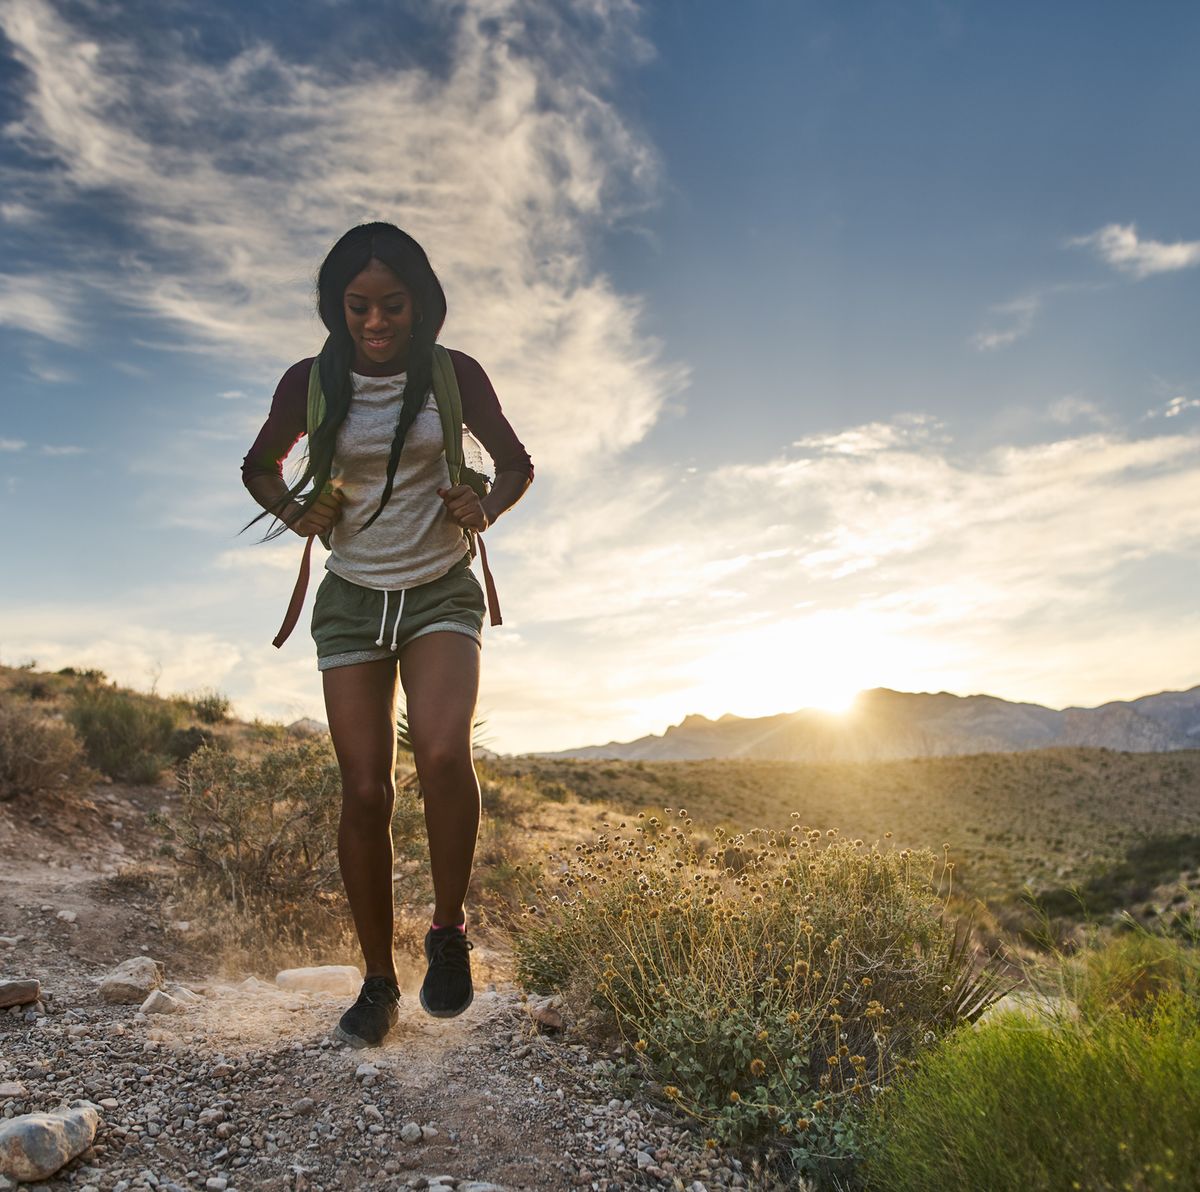 Women's Hiking Outfits- Gear Up for Adventure - The Hiking Adventure